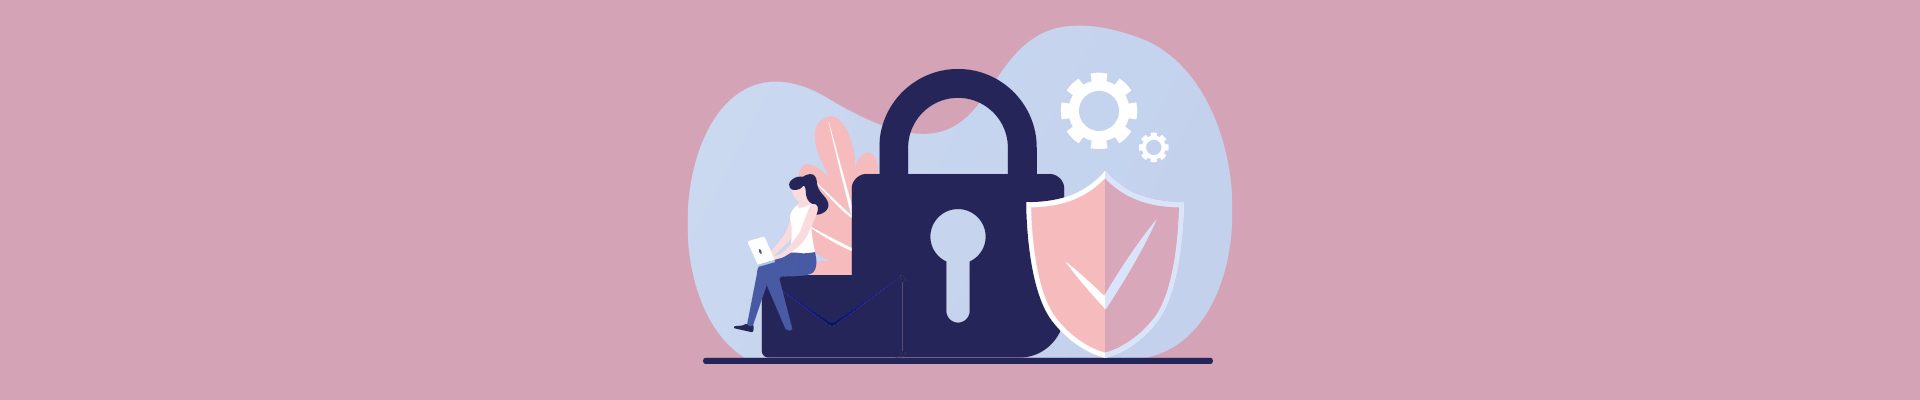 Our top 10 tips for staying secure while working remotely